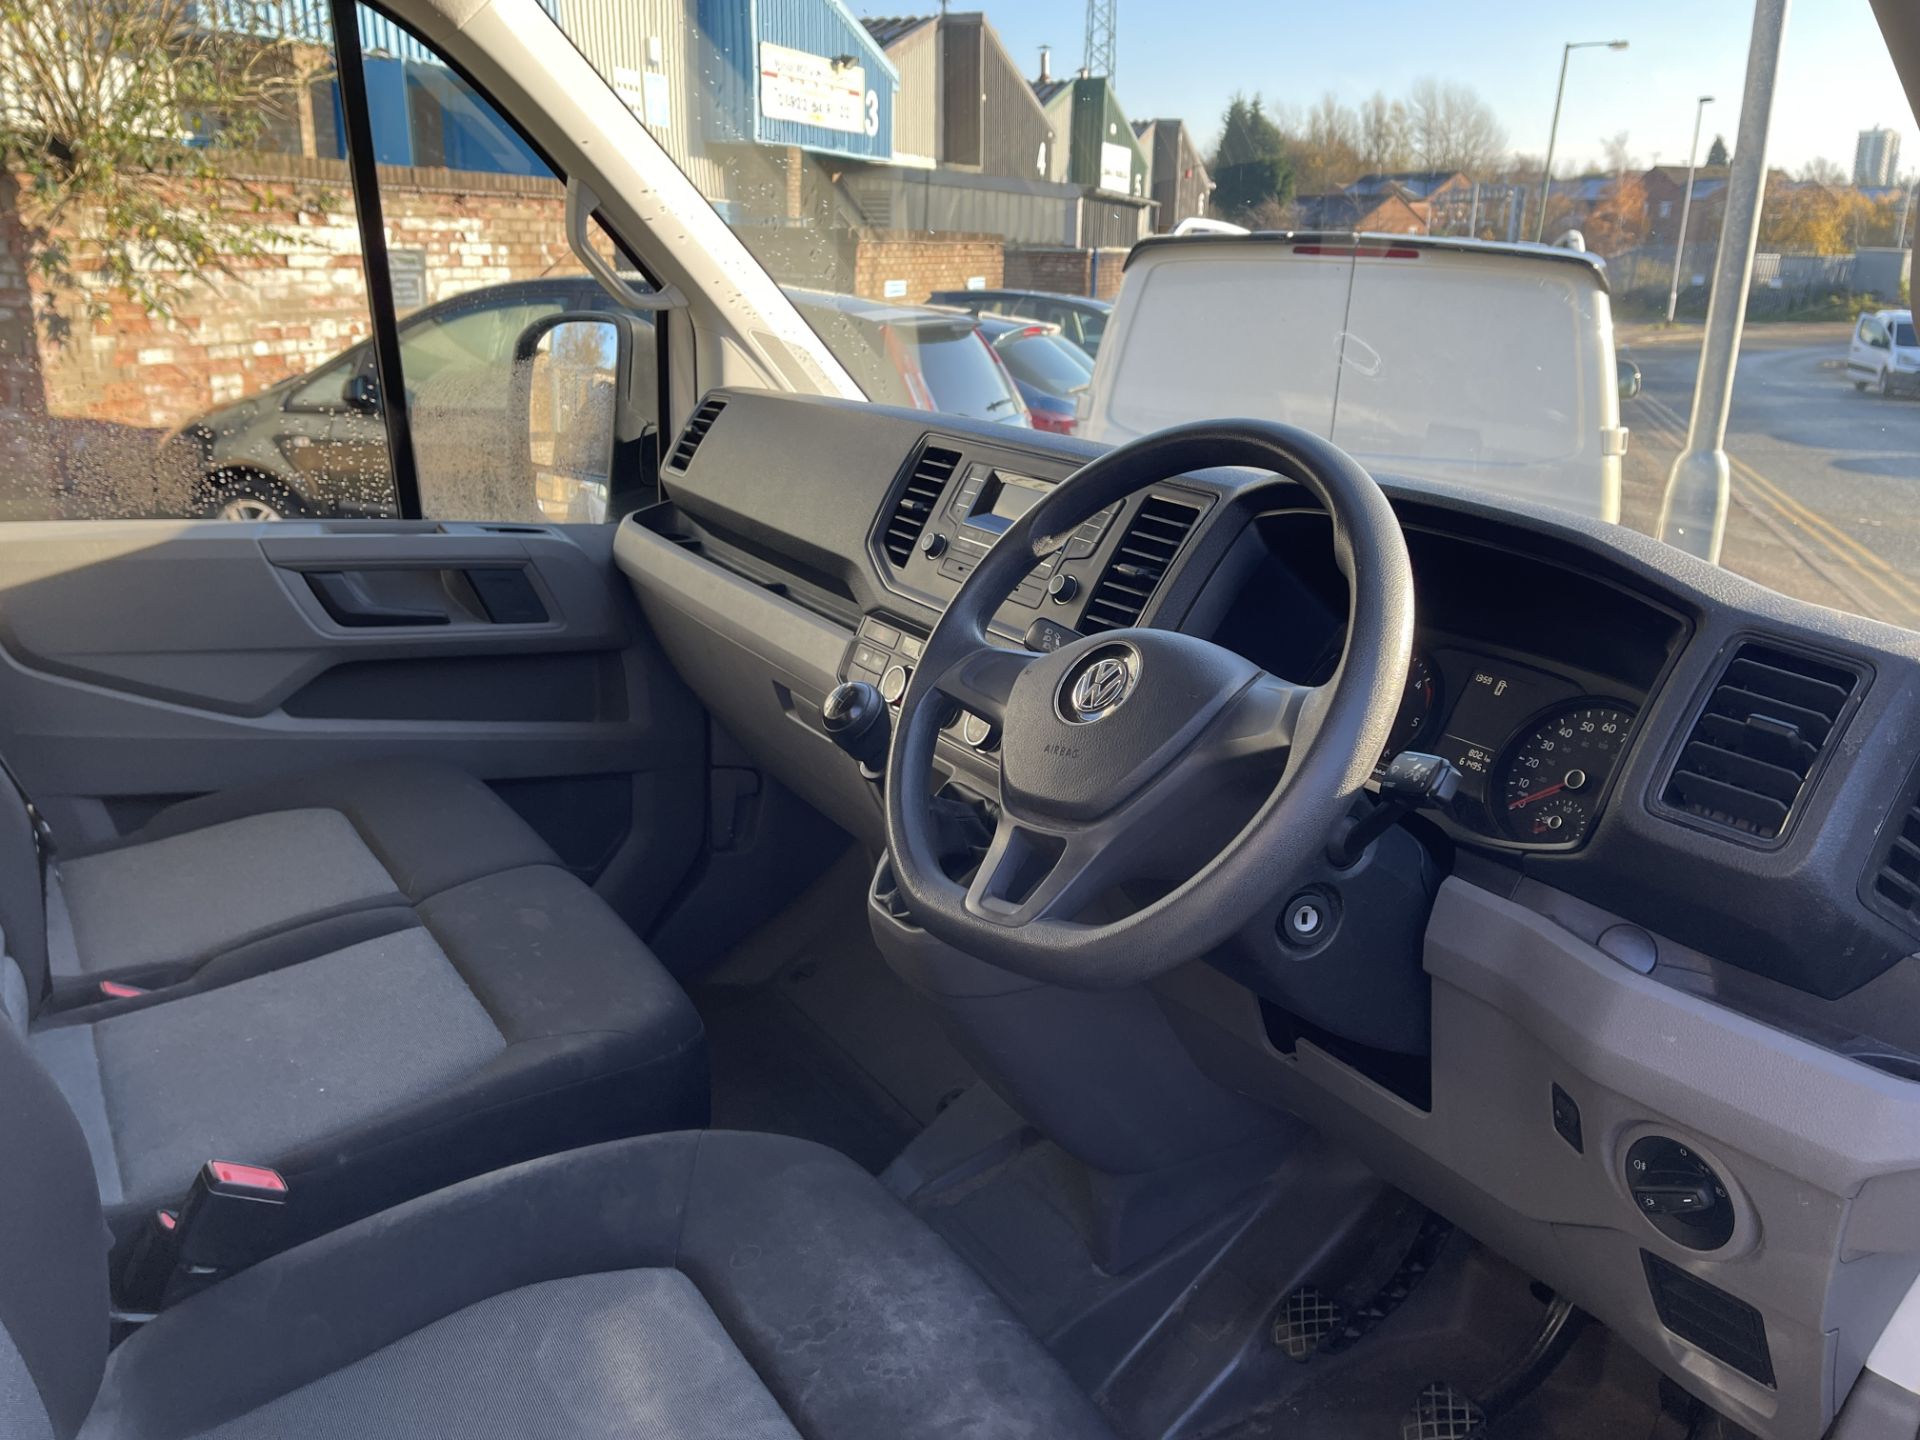 2018 - VW Crafter CR35 102PS Trend Line LWB TDI - Image 19 of 34